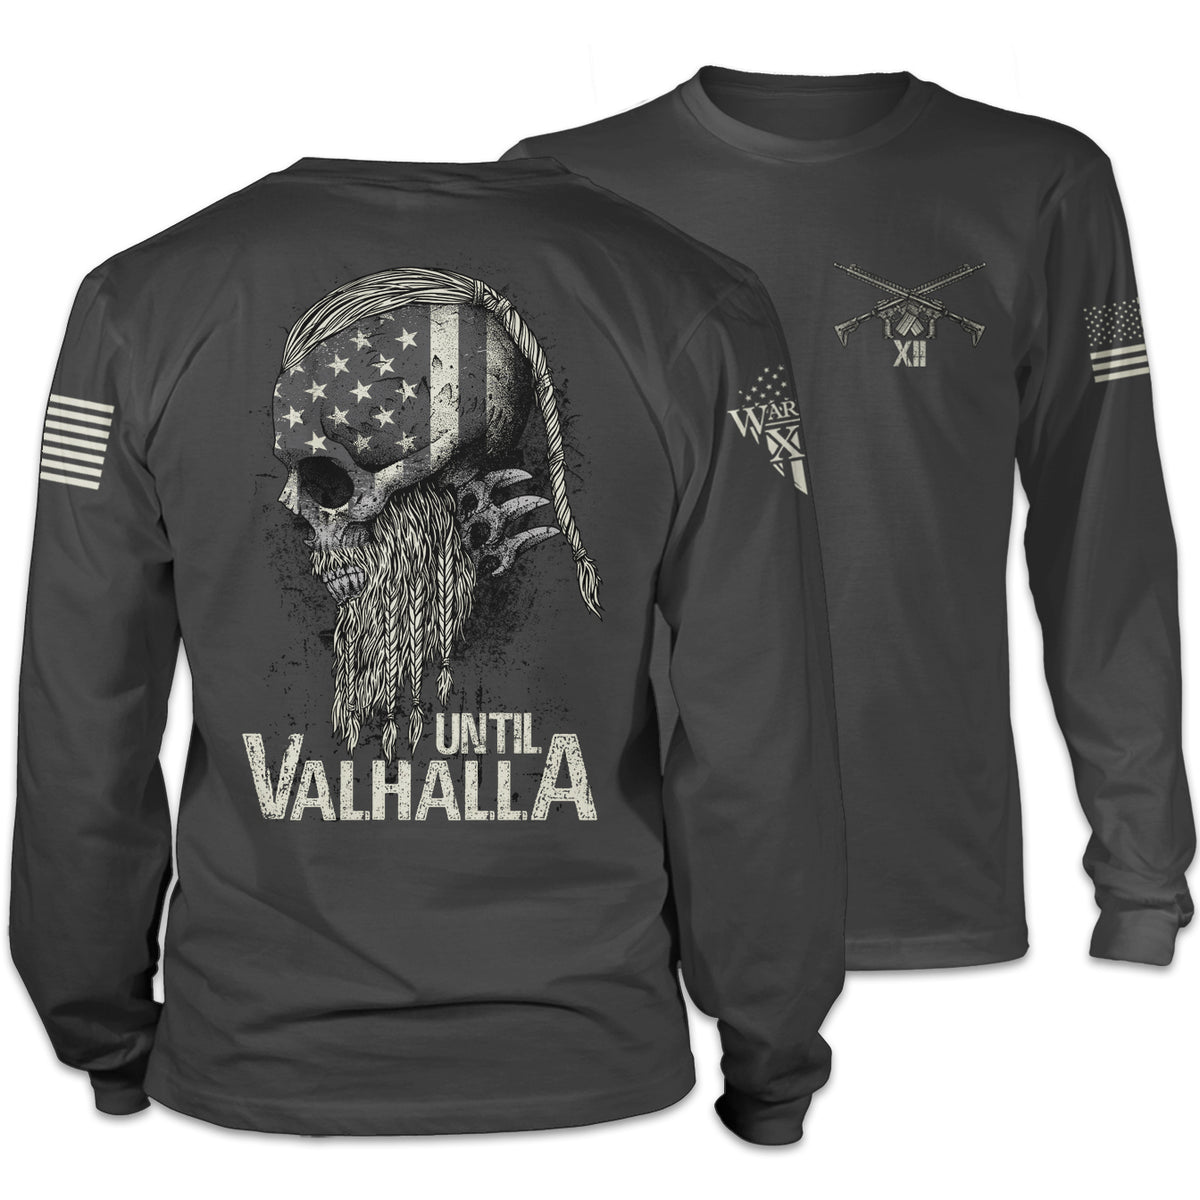 Front & back dark grey long sleeve shirt with the words "Until Valhalla" and a side view of a viking printed on the shirt.